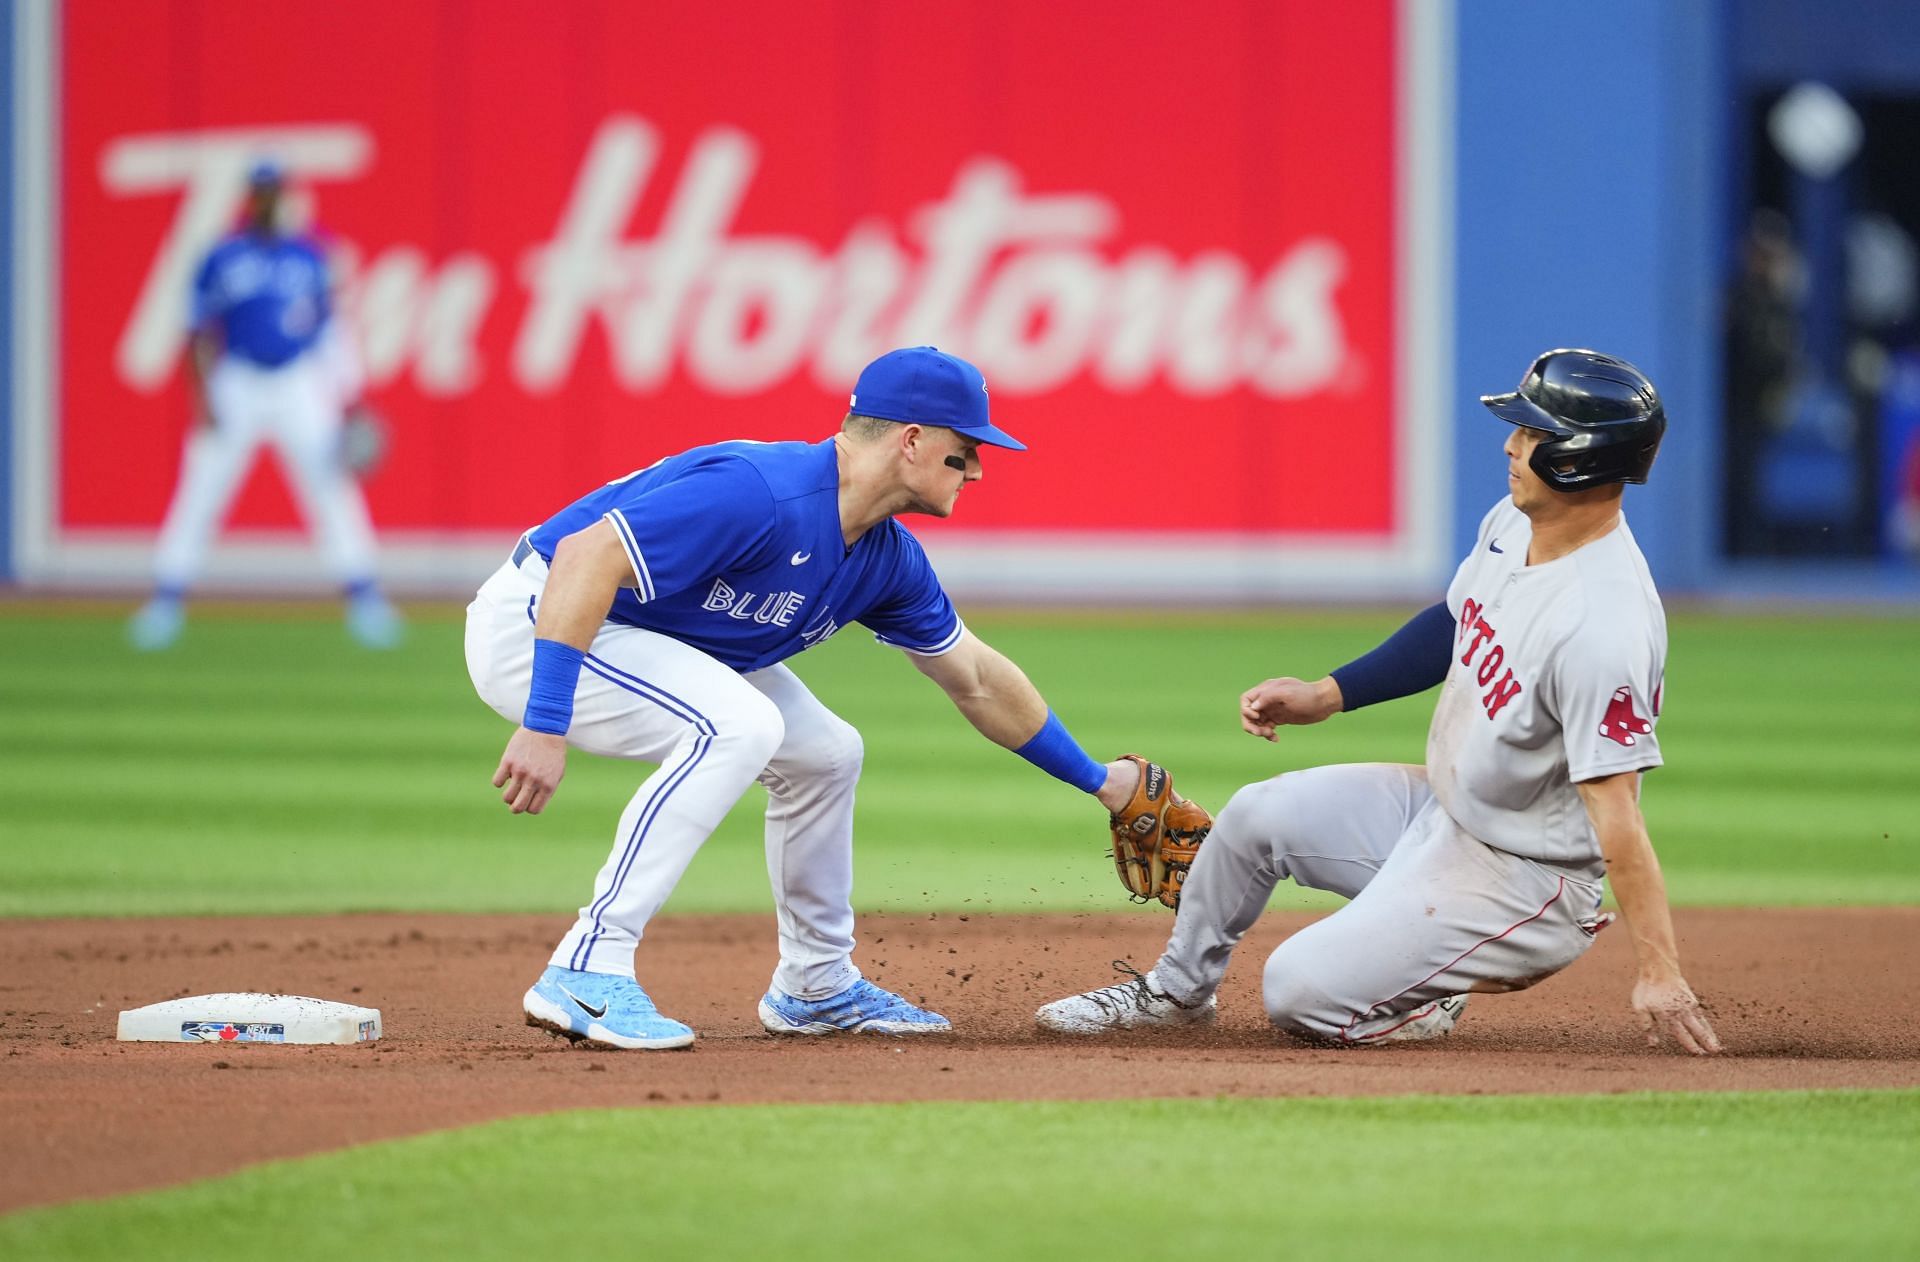 The Red Sox and Blue Jays match up on Wednesday.